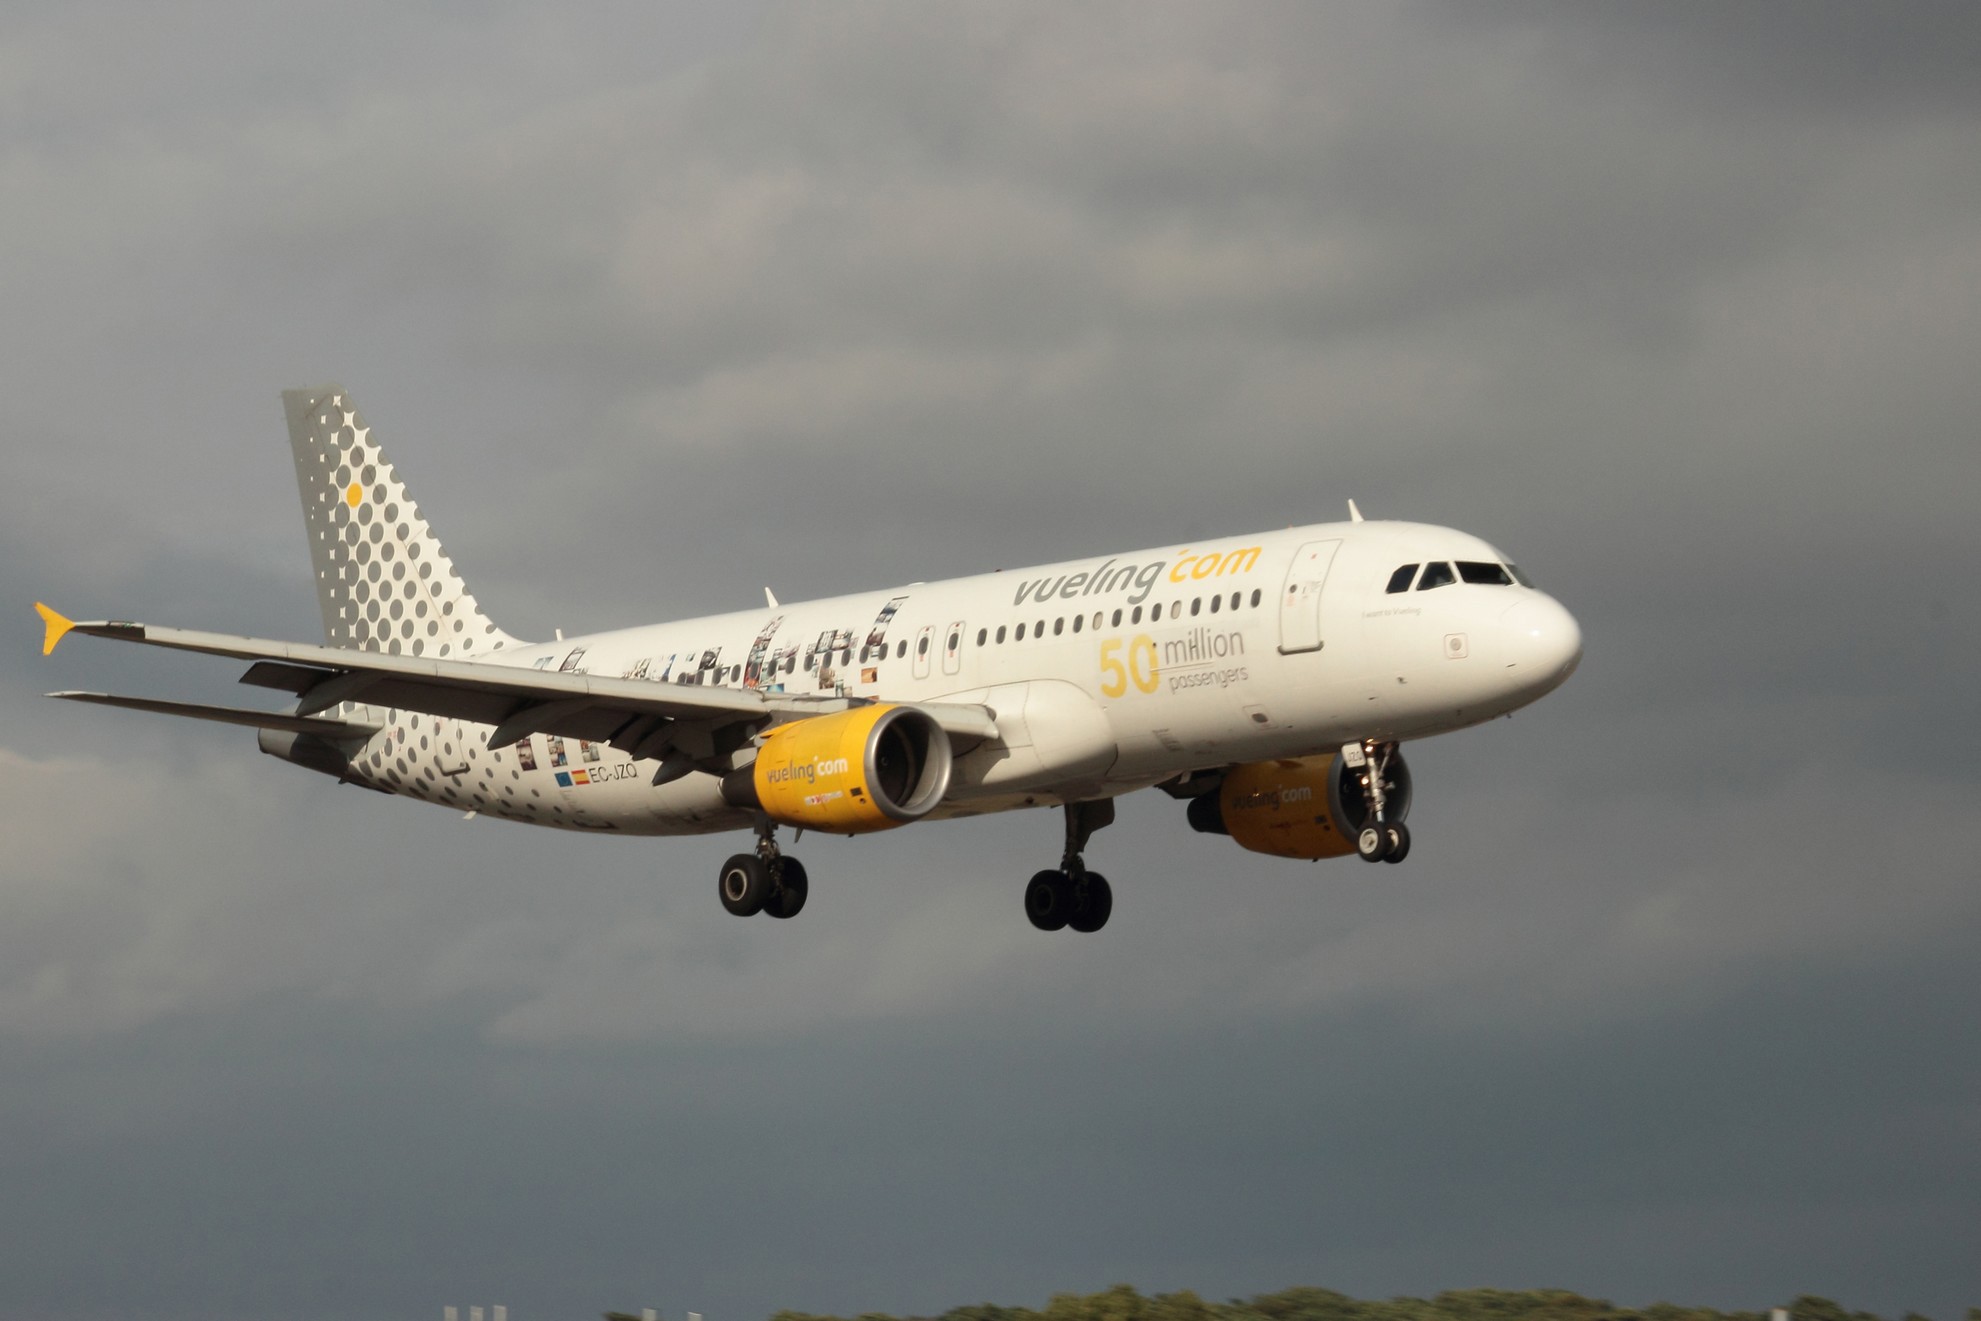 [13/07/2014] Airbus A320 (EC-JZQ) Vueling Airlines "I want to Vueling" Nantes22